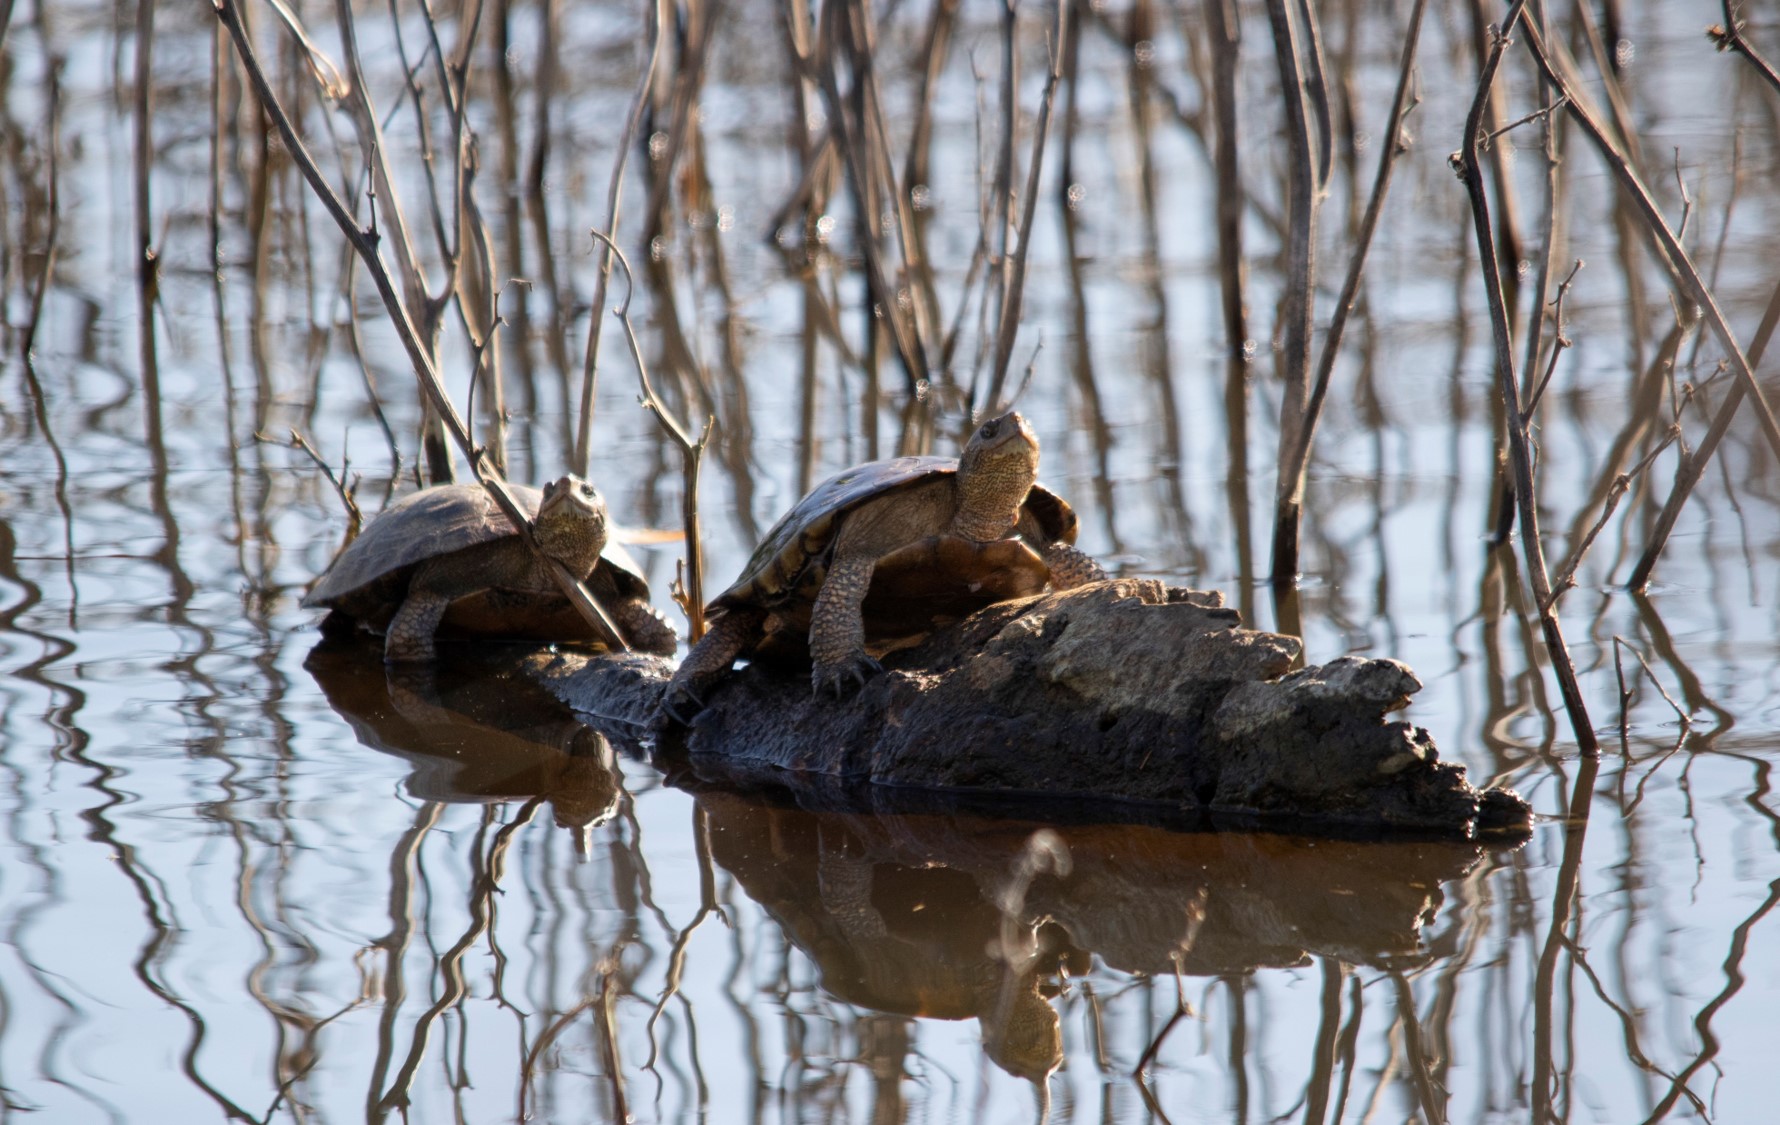 Two turtles sitting on a rock surrounded by water